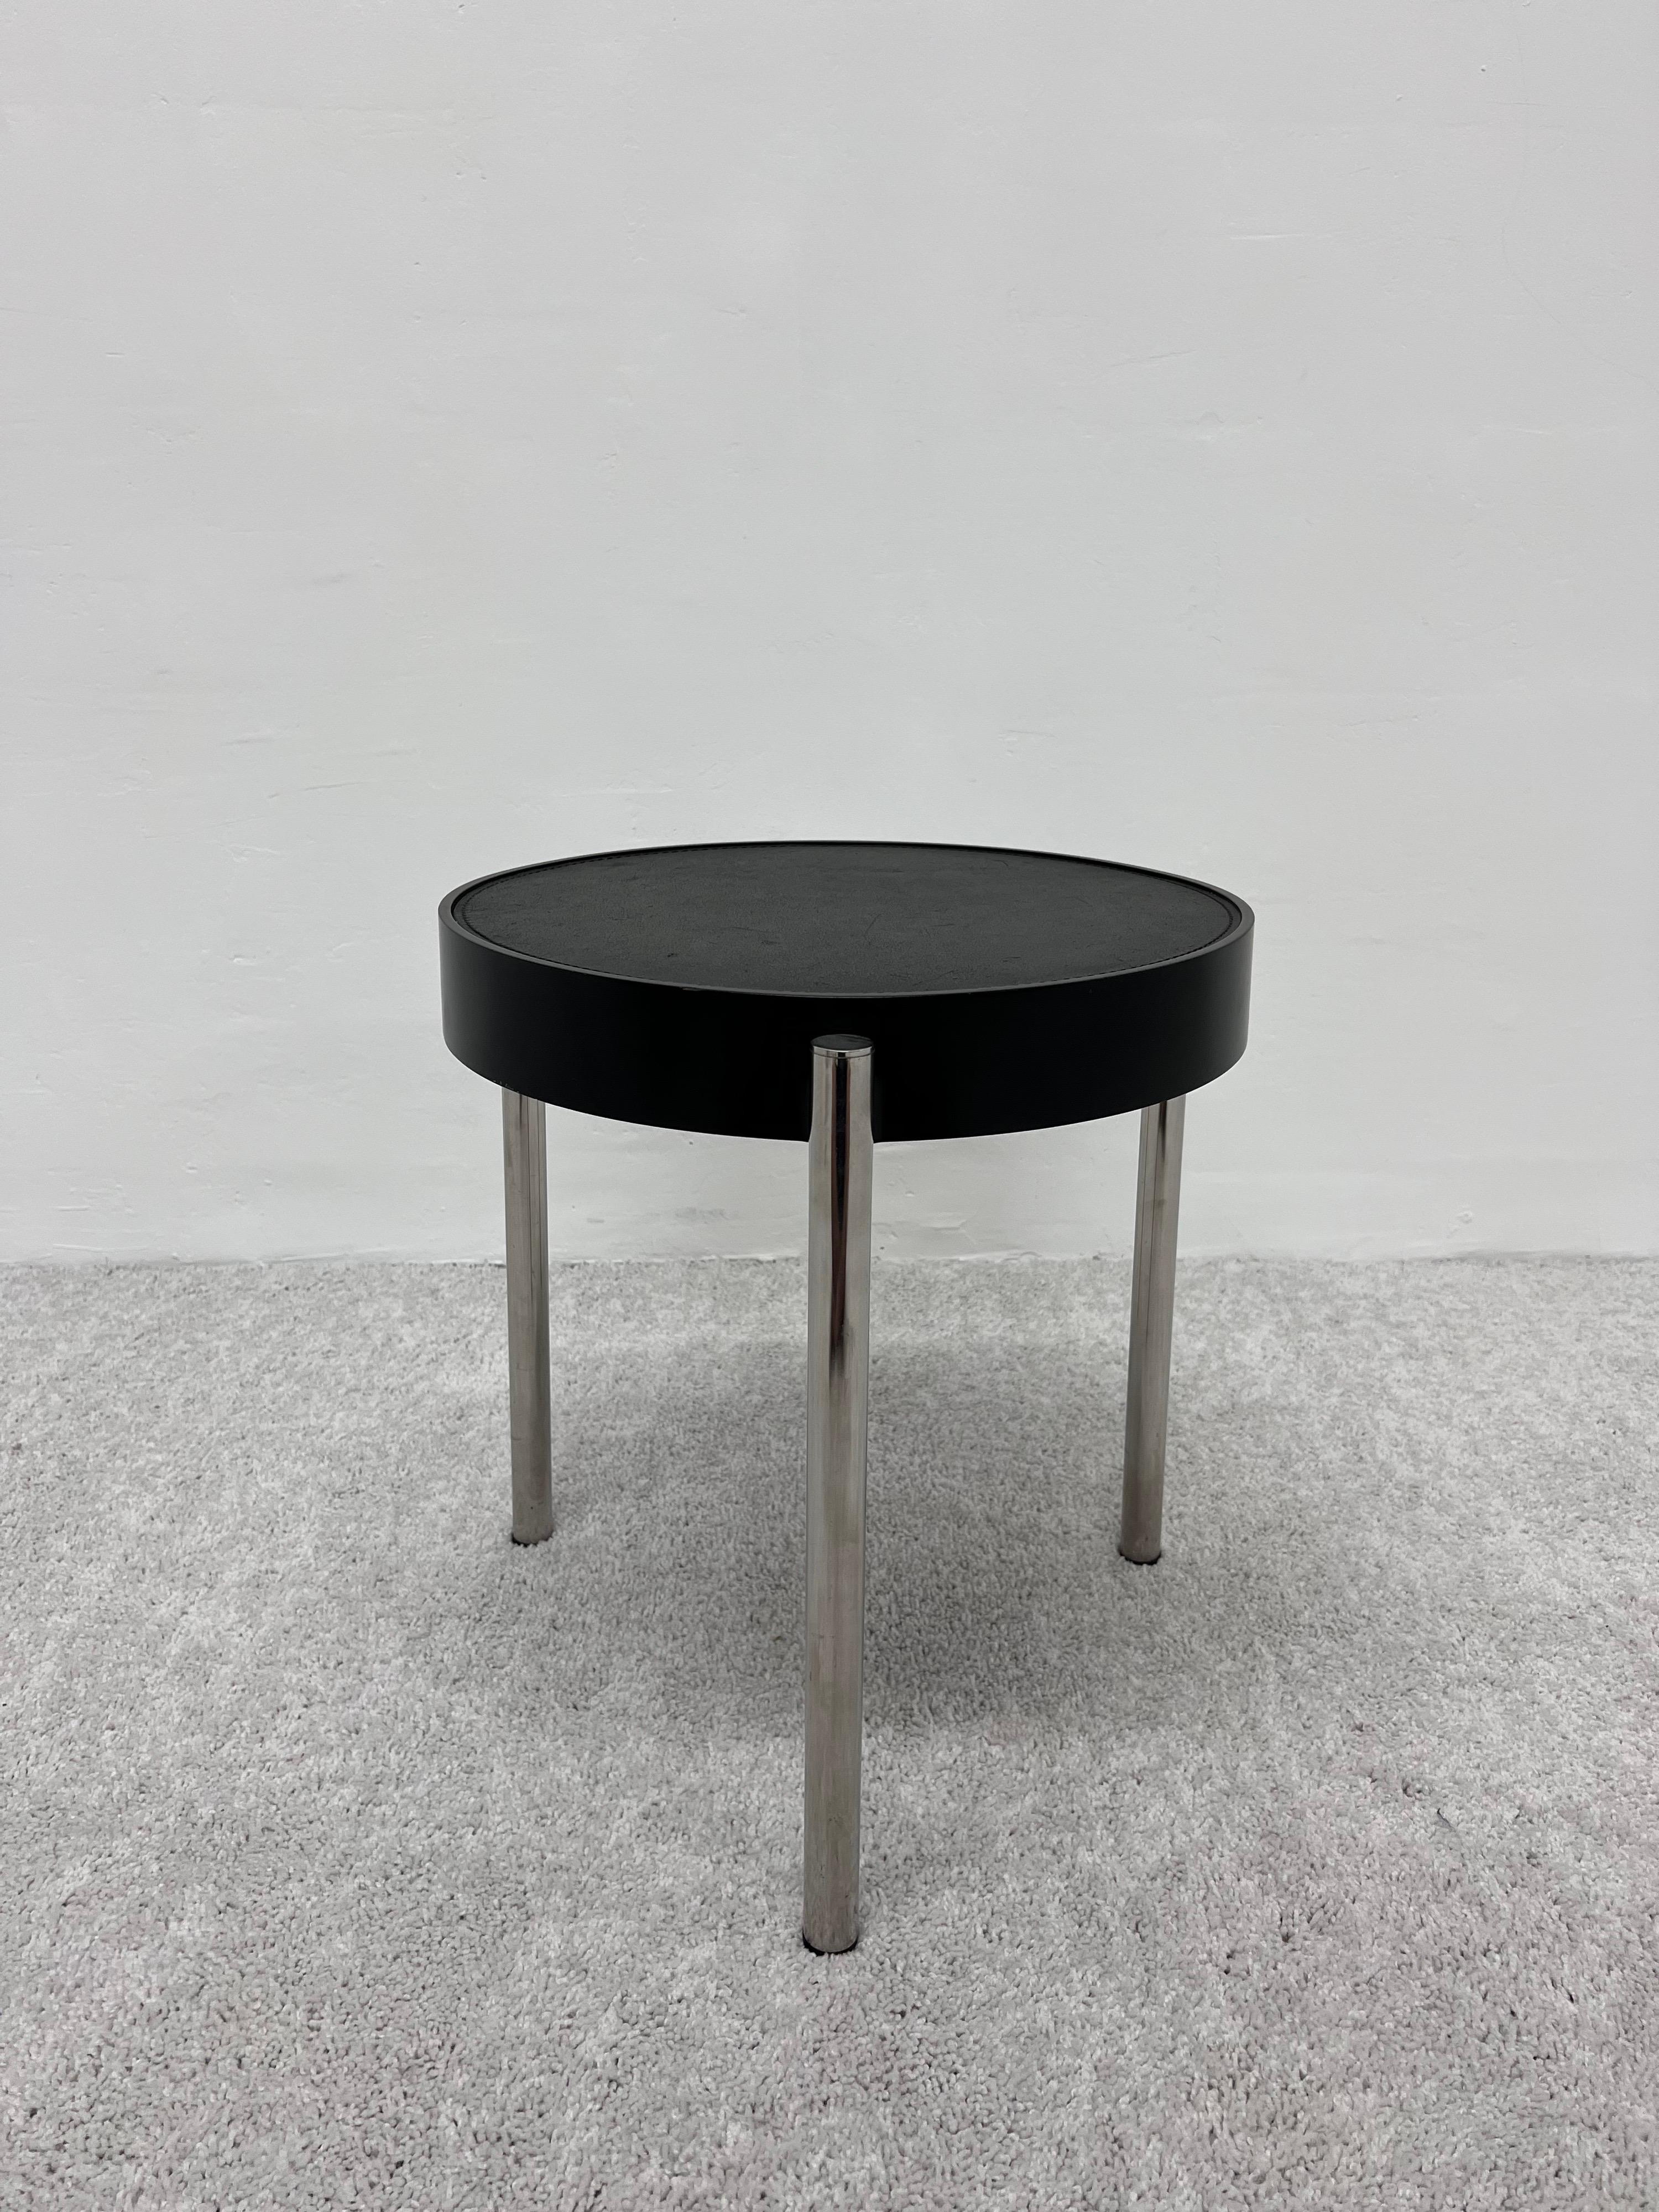 Brighella 634 side table from the Historical Archive collection of Zanotta Spa., 1980s. Top is stain resistant black leather stitched into a black lacquer hard polyurethane seat and is supported by three tubular stainless steel legs.

Top measures